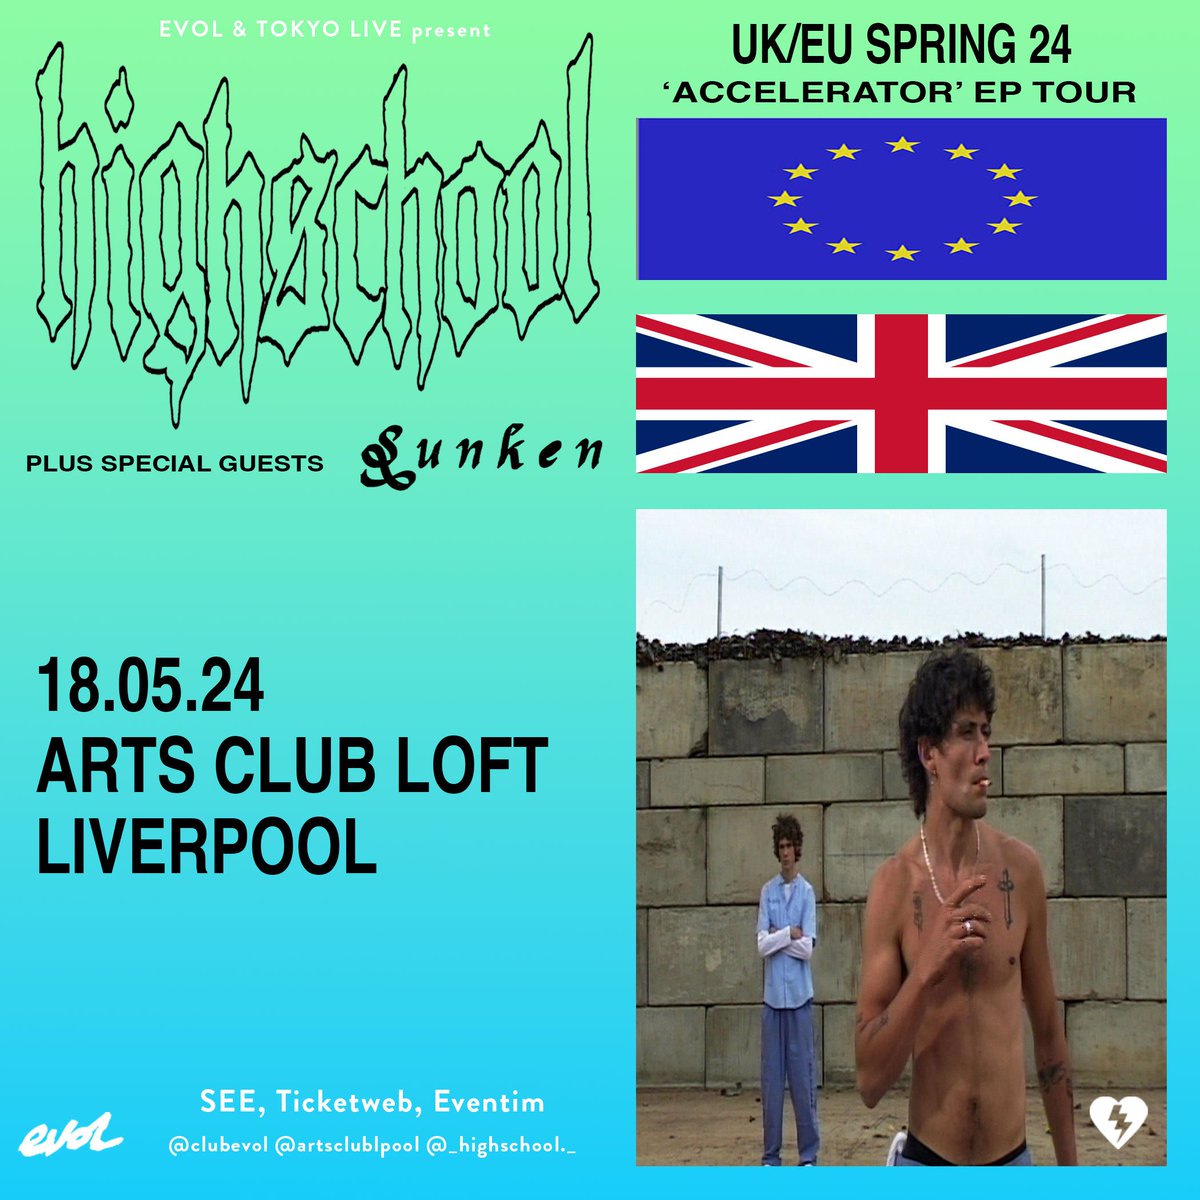 ***ANNOUNCEMENT*** Delighted to have London-based, Melbourne-raised post-punk duo 𝐇𝐢𝐠𝐡𝐒𝐜𝐡𝐨𝐨𝐥 and special guests @Sunken_Music joining us at @artsclublpool May 18 in support of new EP 𝘈𝘤𝘤𝘦𝘭𝘦𝘳𝘢𝘵𝘰𝘳 - out April 19 @pias_australia. Tickets on-sale 9am Fri March 1.